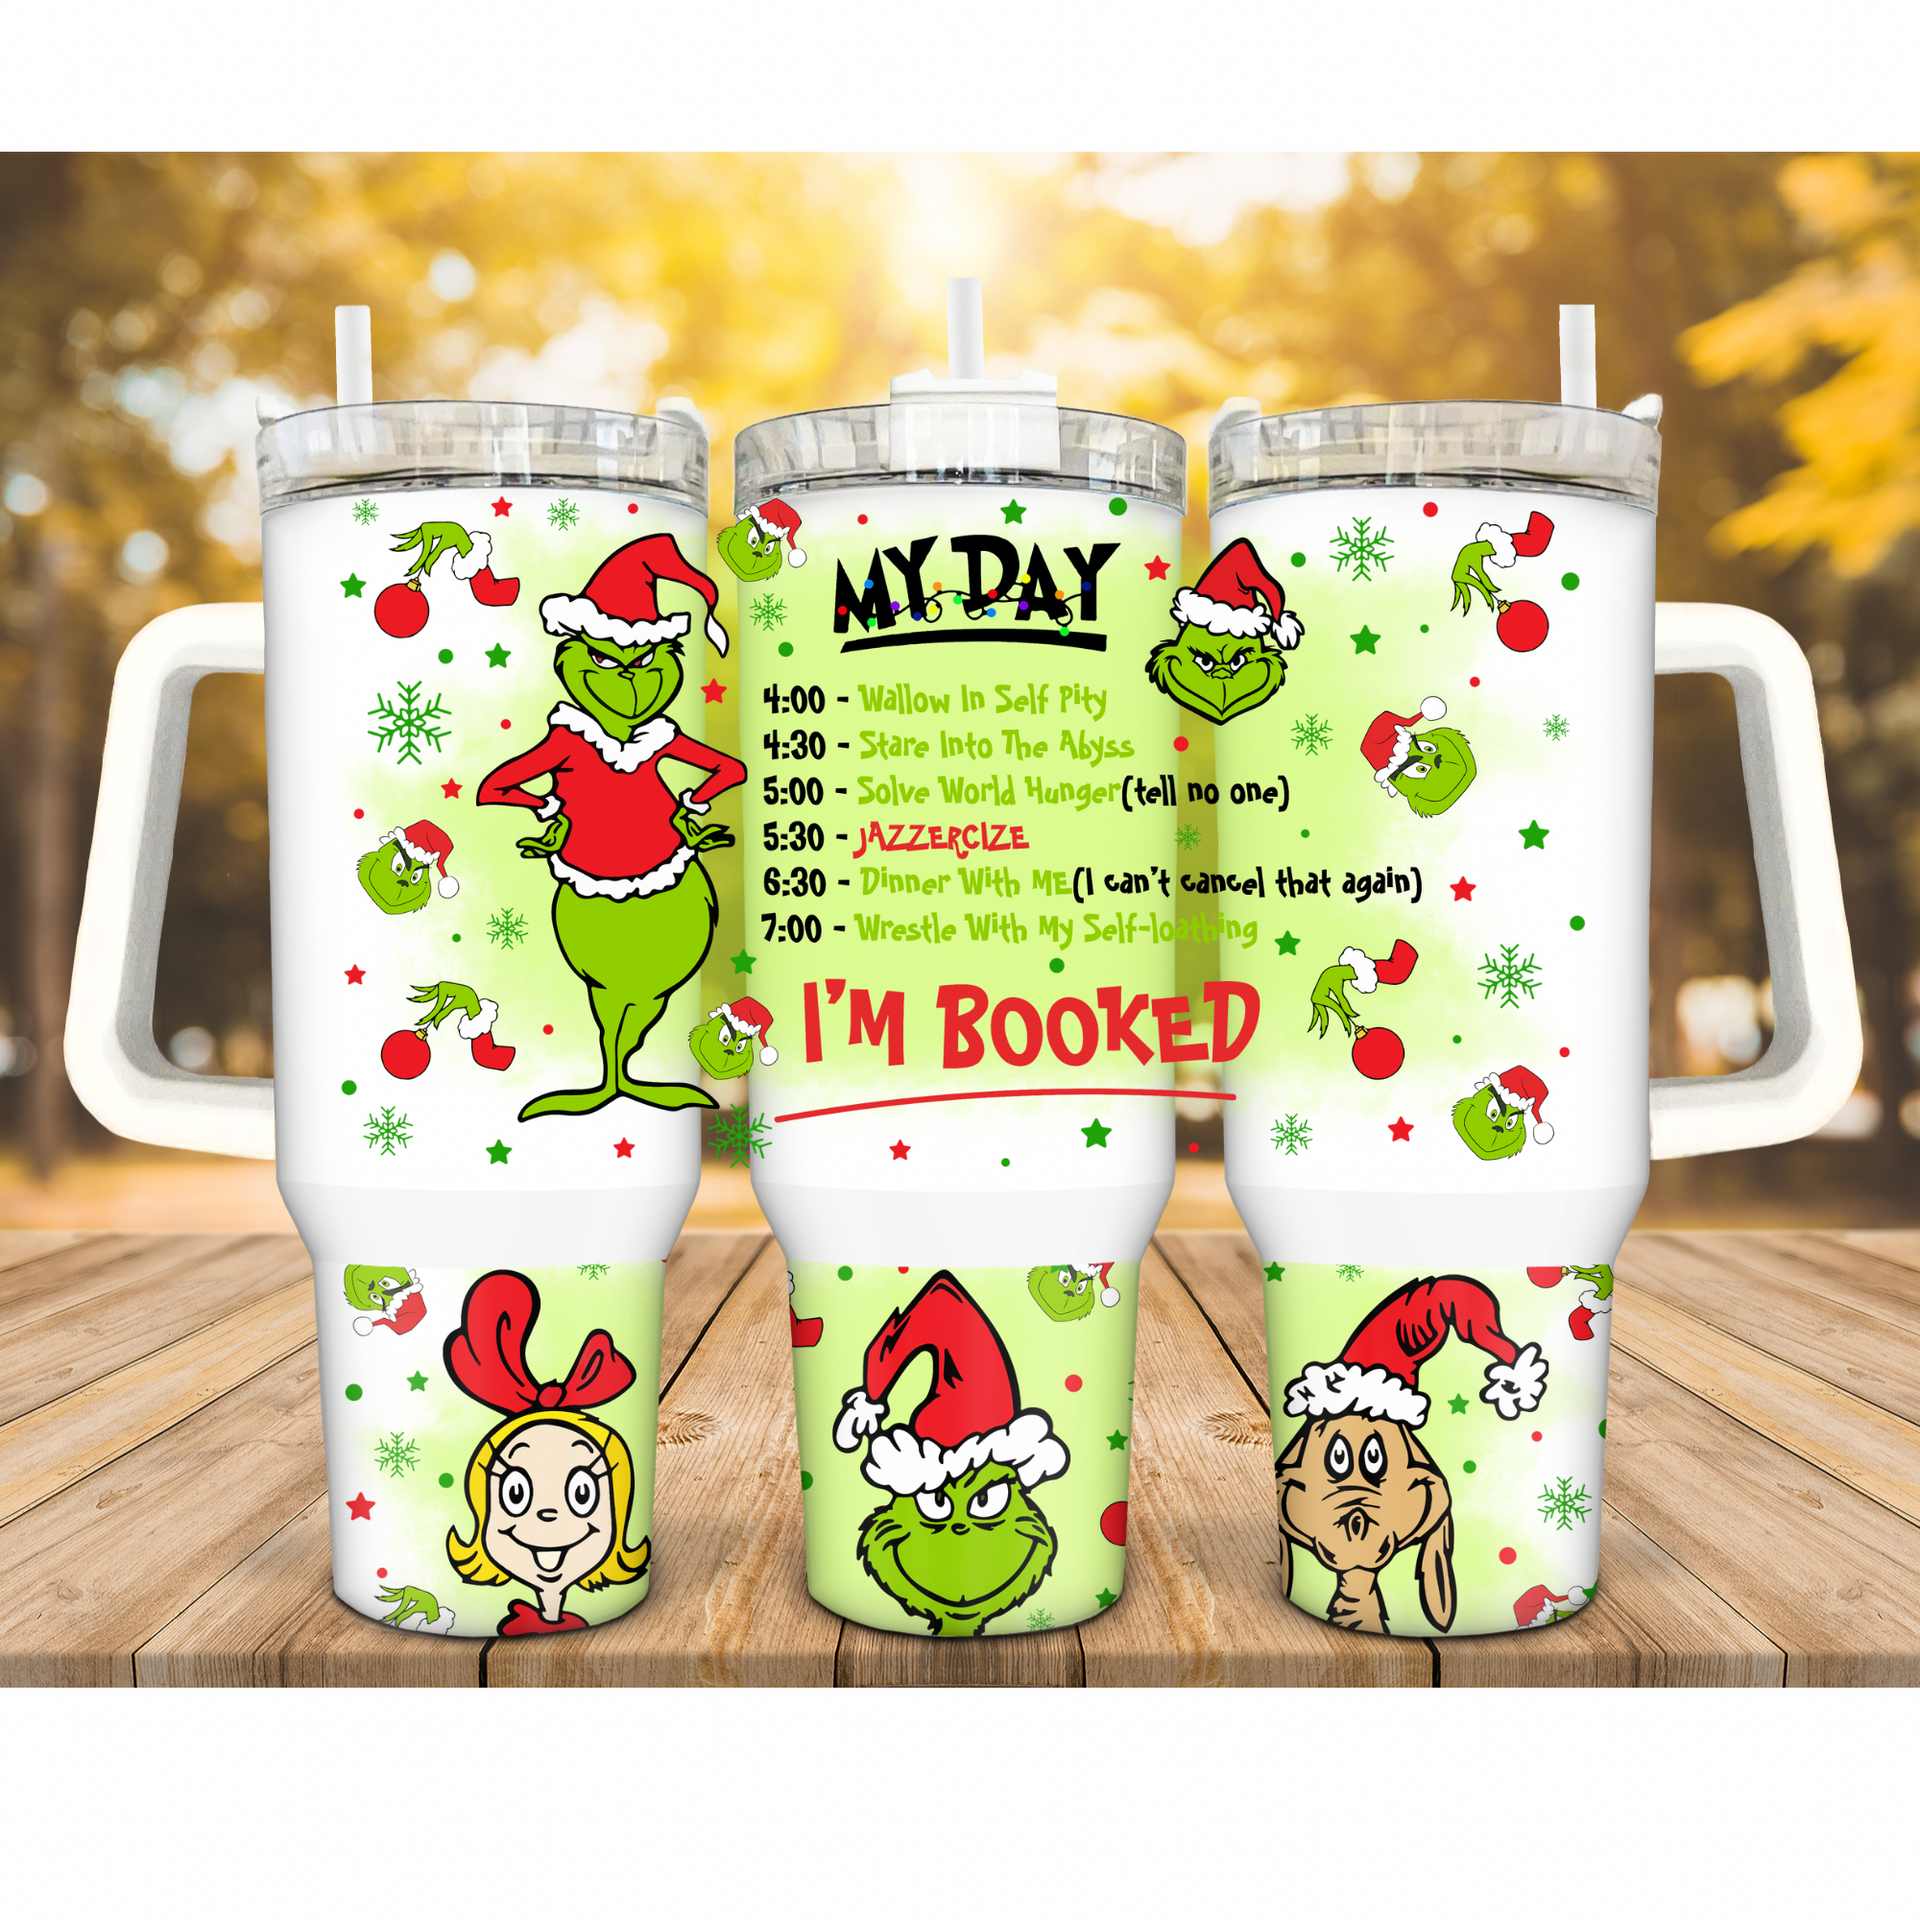 Hobby Lobby's Grinch Stanley Cup dupe is a Christmas must-have